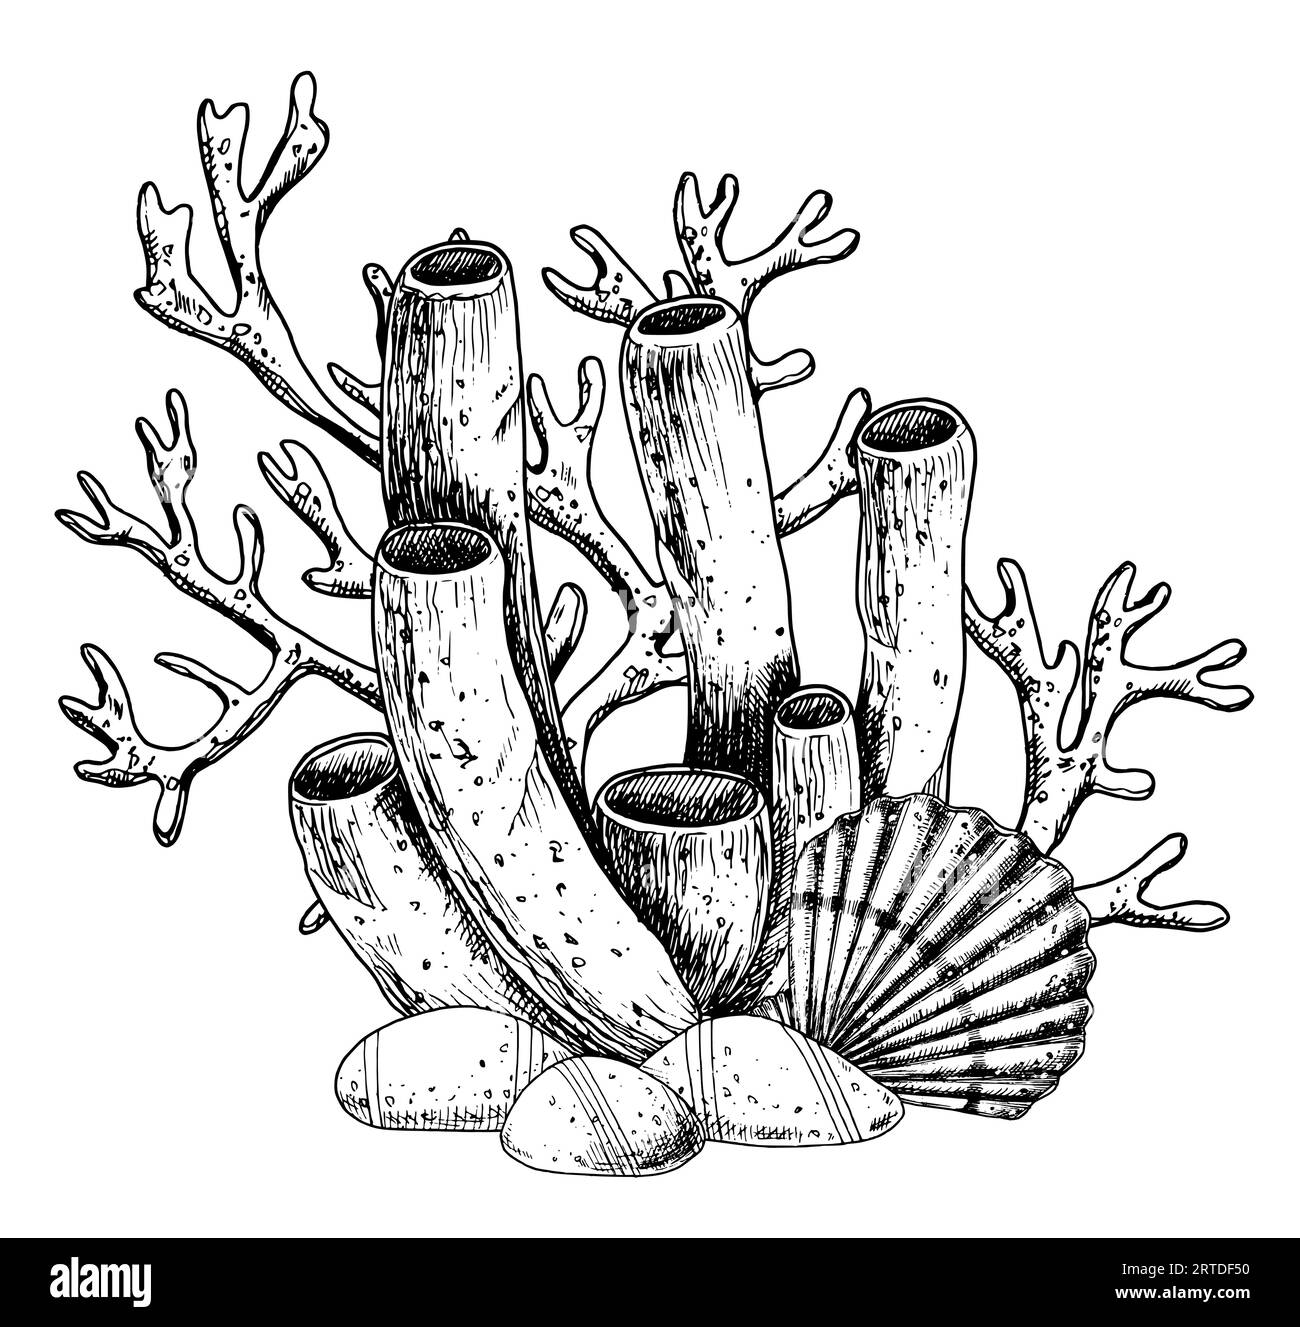 Coral Reefs with seashell and seabed. Vector hand drawn illustration of sea floor on isolated background. Underwater line art composition with seaweed and stones. Drawing painted by black inks. Stock Vector